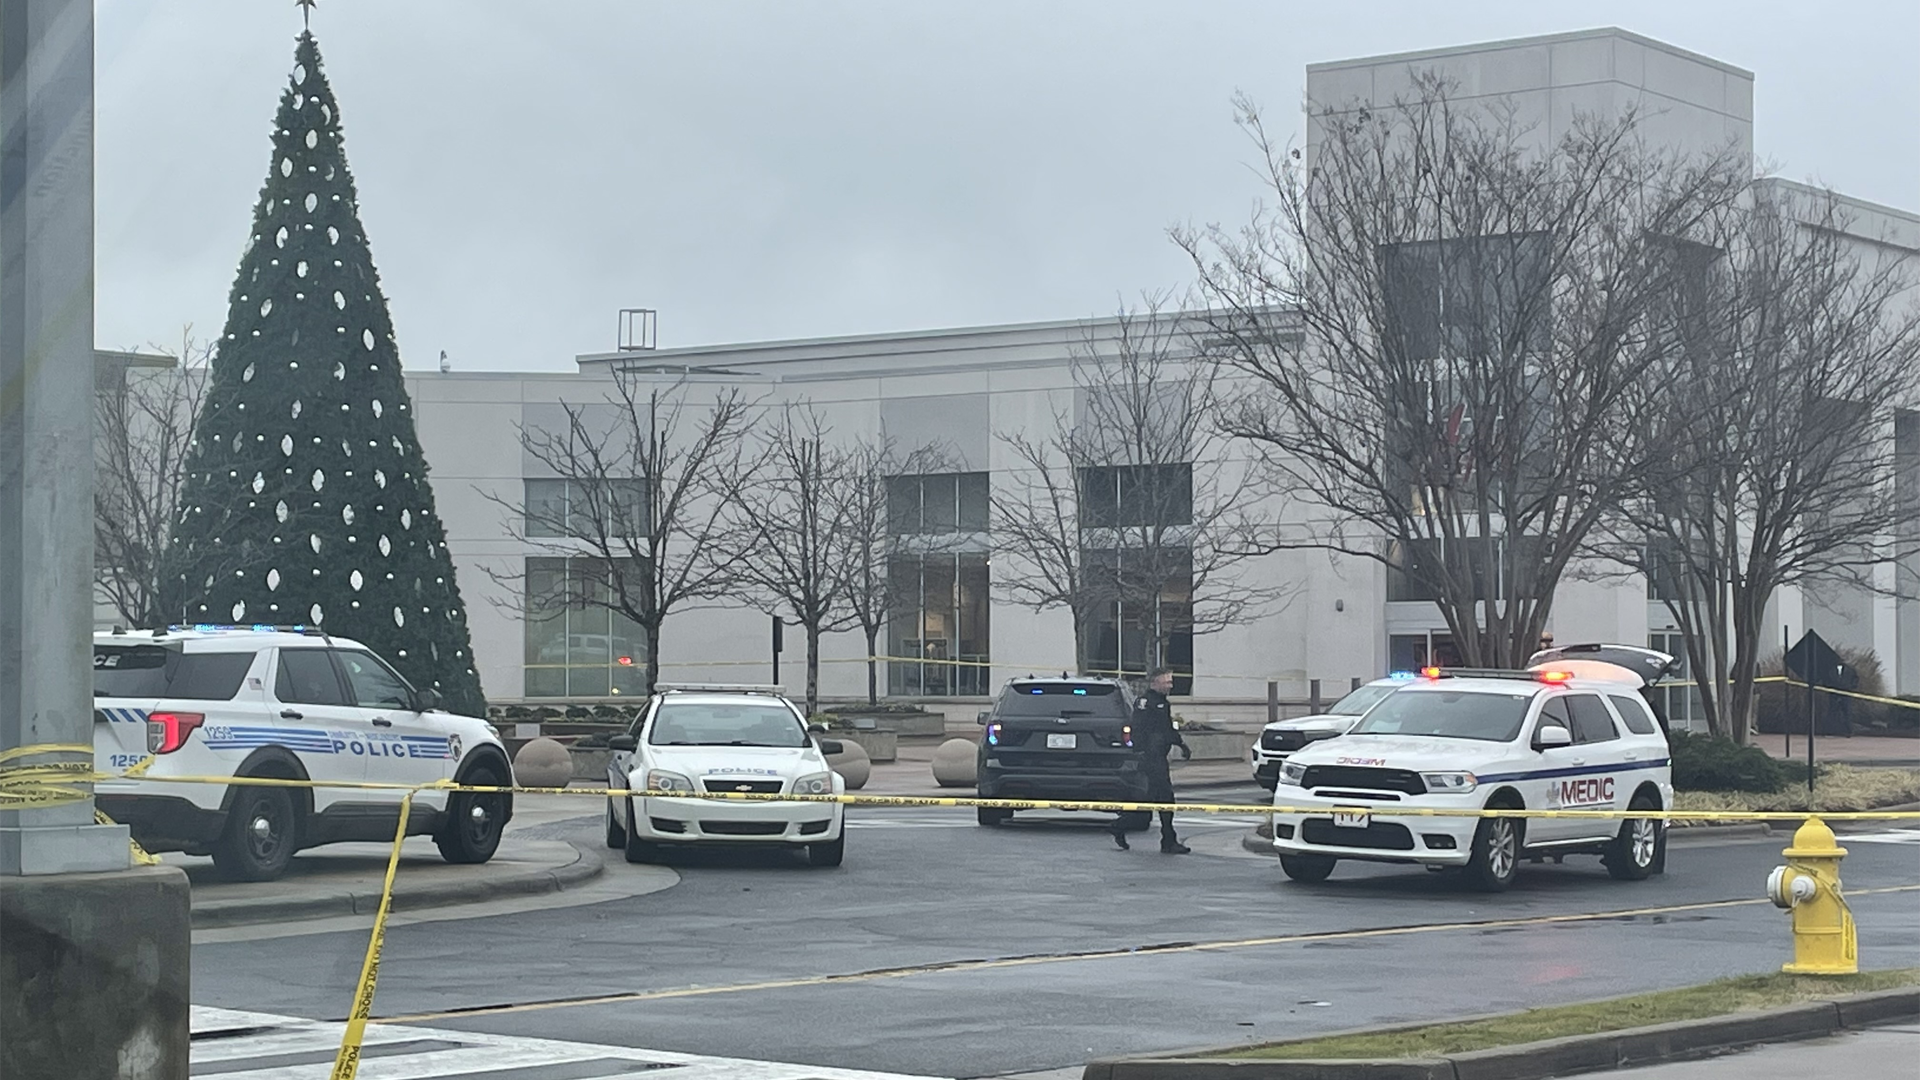 2 people seriously injured after shooting at Northlake Mall